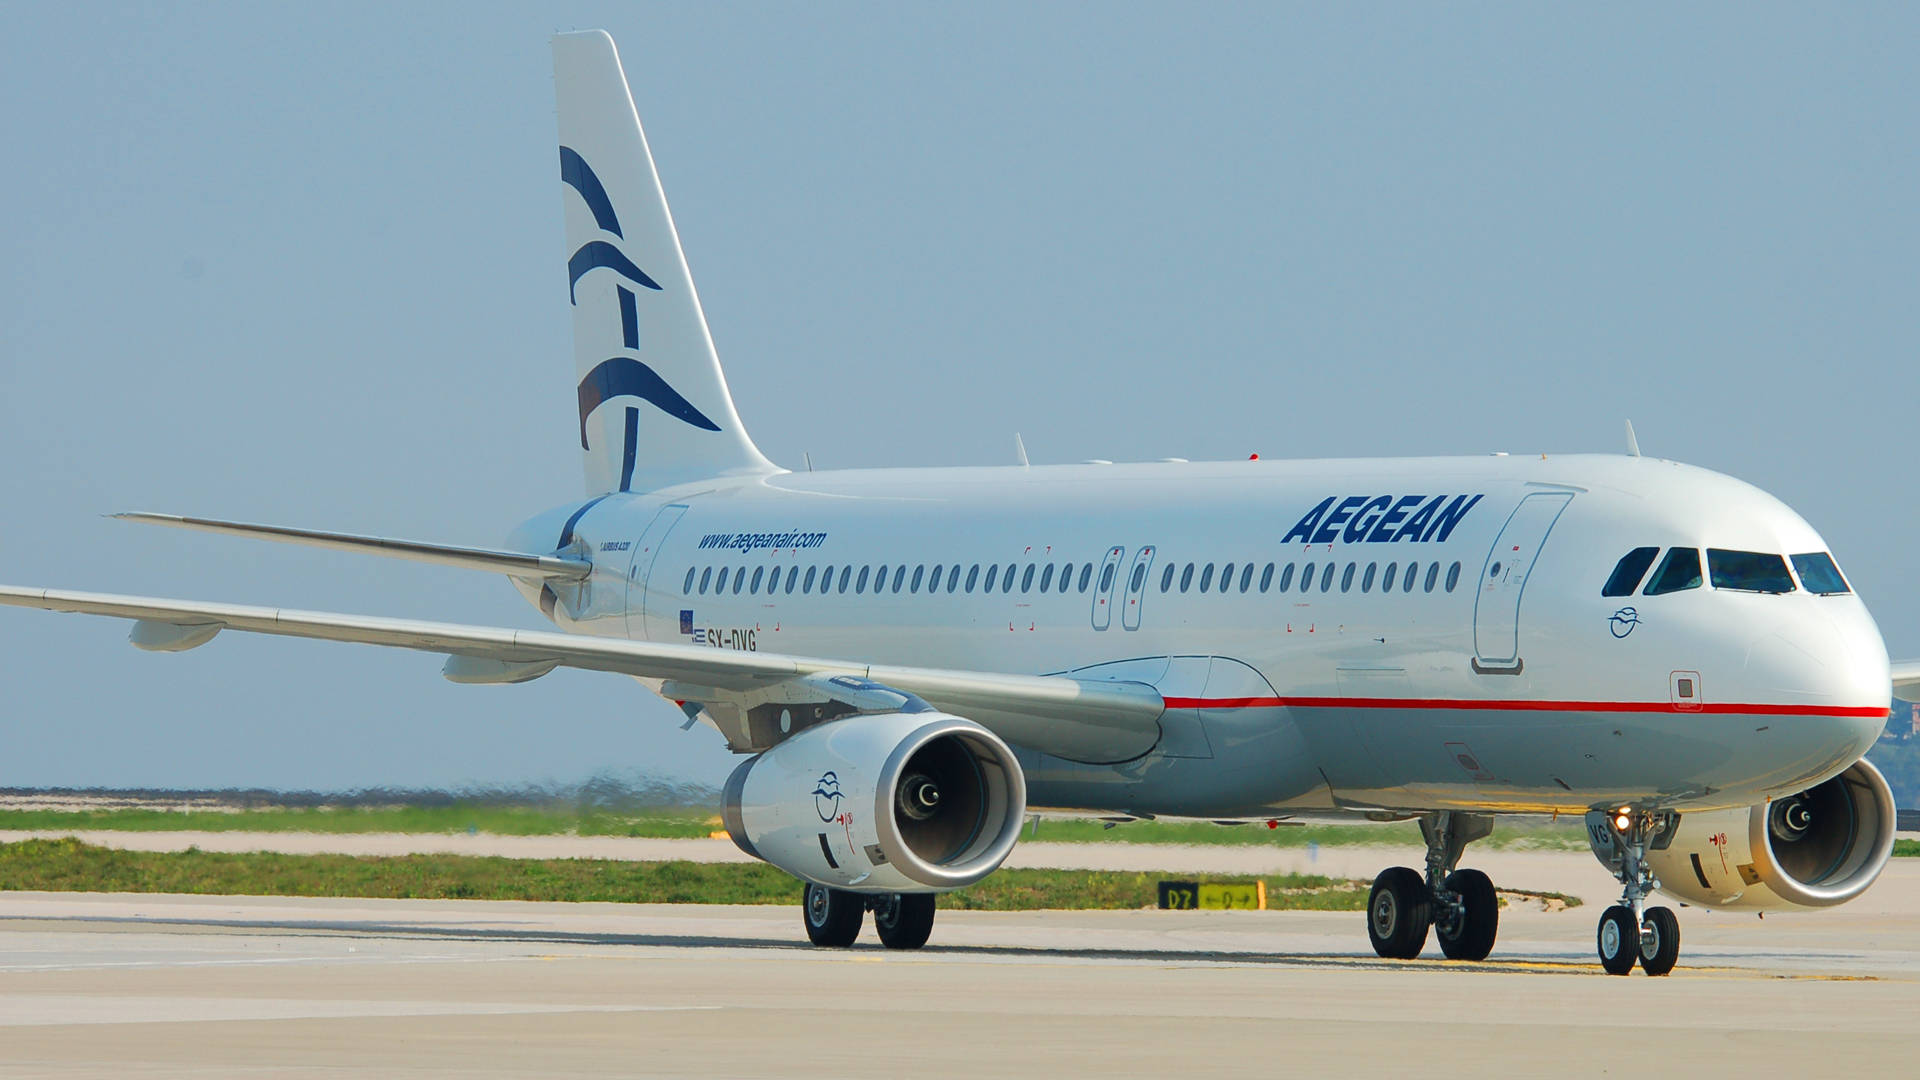 Taxiadeaegean Airlines Nationalbärare Airbus A320. Wallpaper